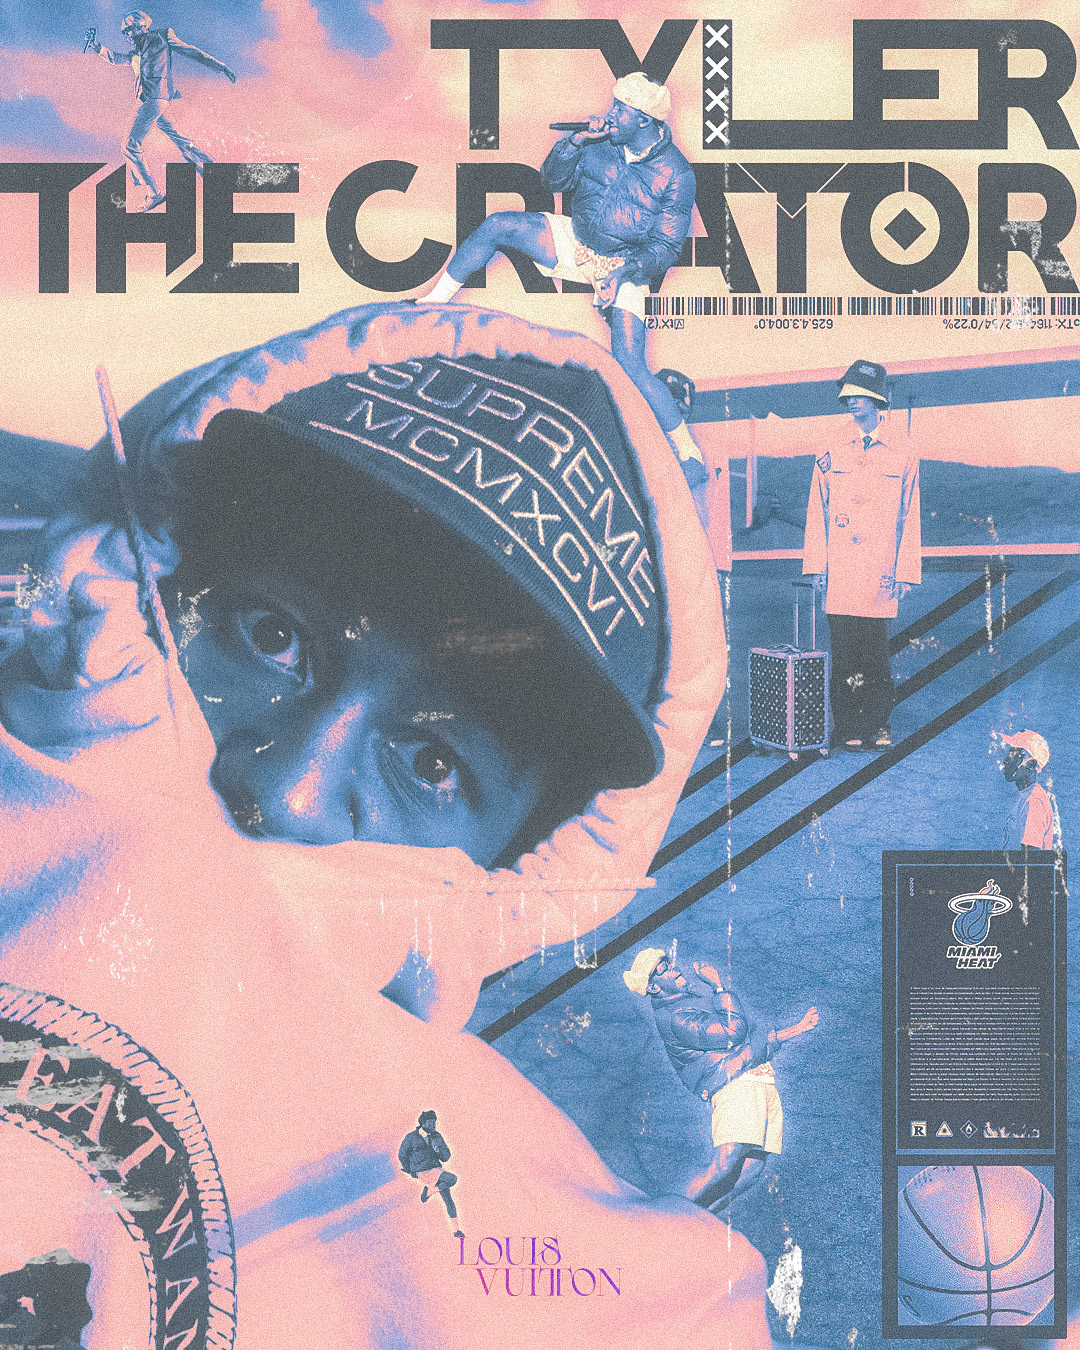 file of TYLER THE CREATOR rendition image